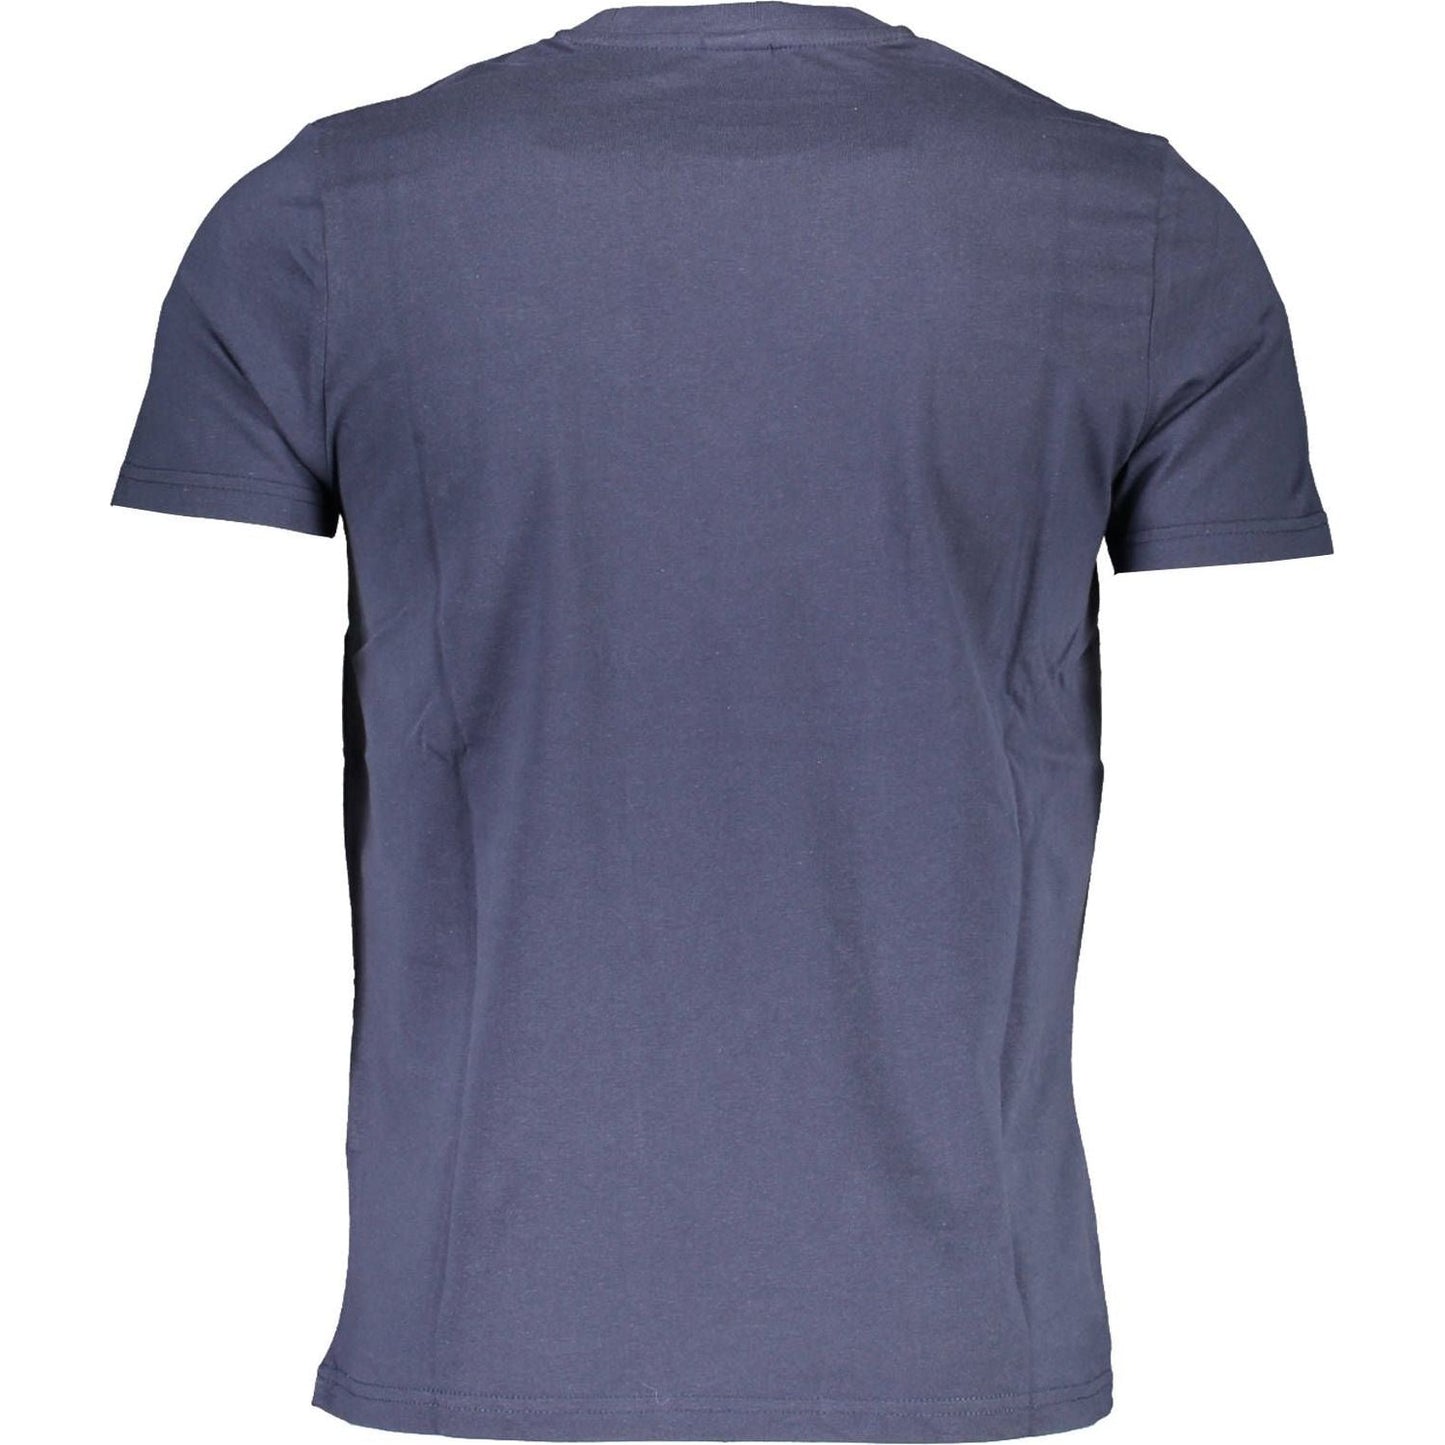 North Sails Blue Cotton Casual Round Neck Tee blue-cotton-casual-round-neck-tee